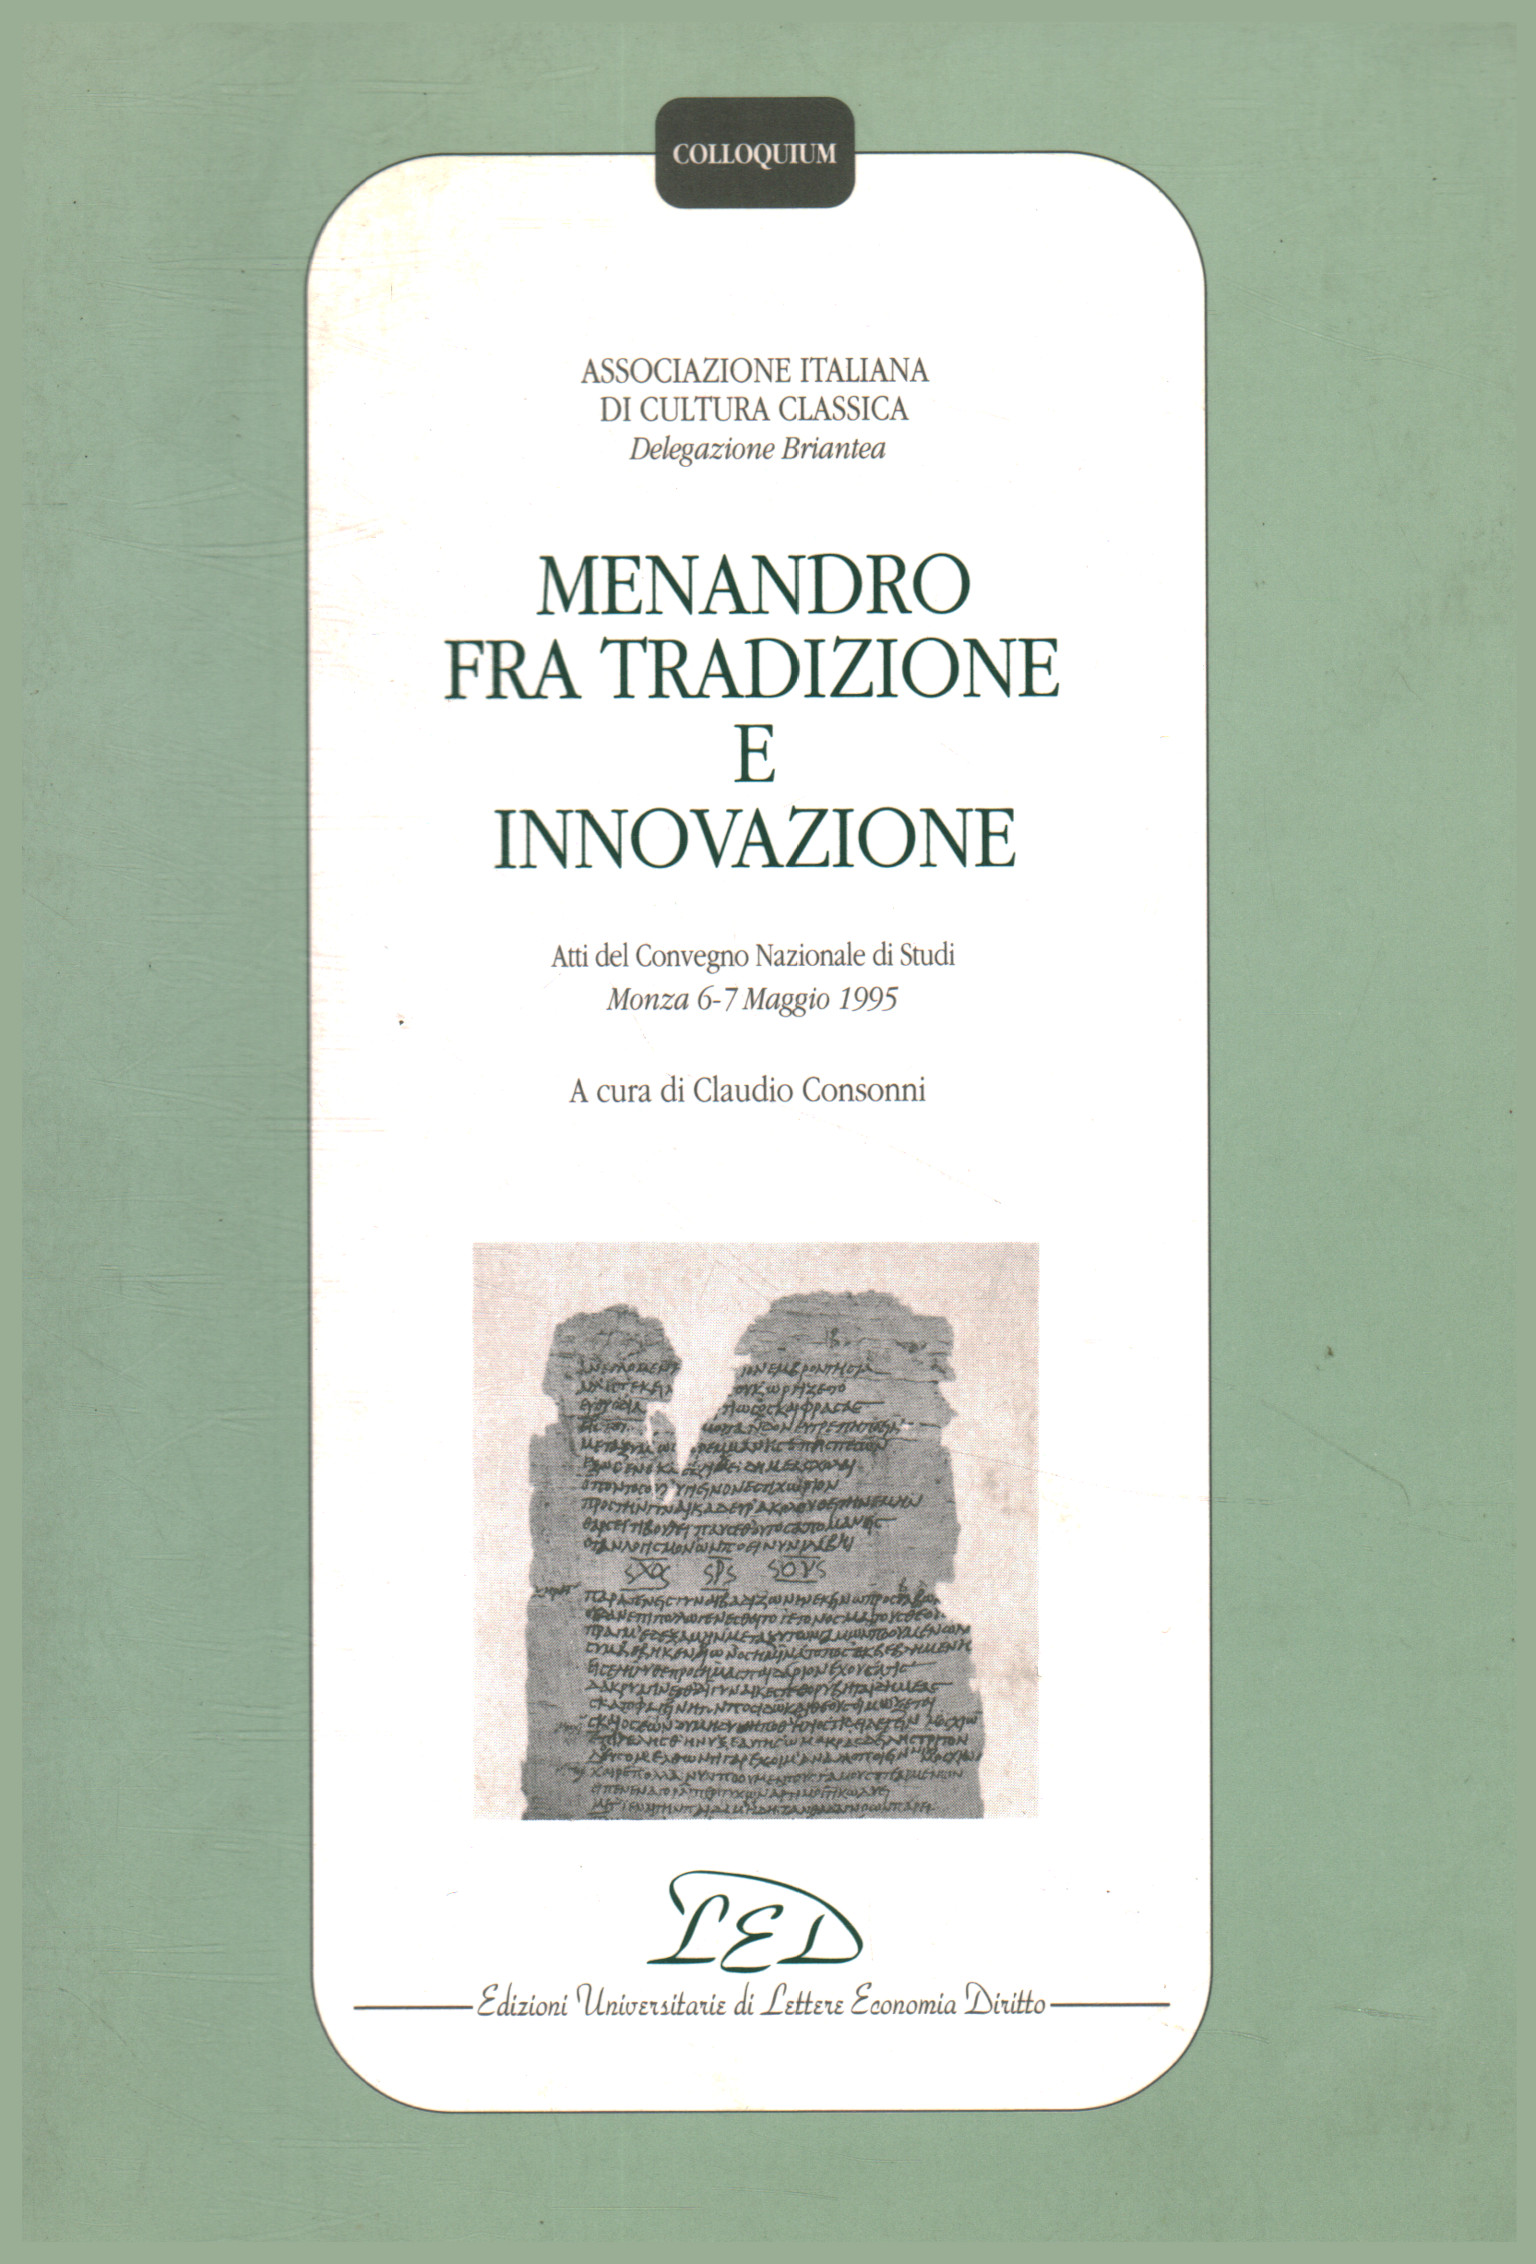 Menandro between tradition and innovation